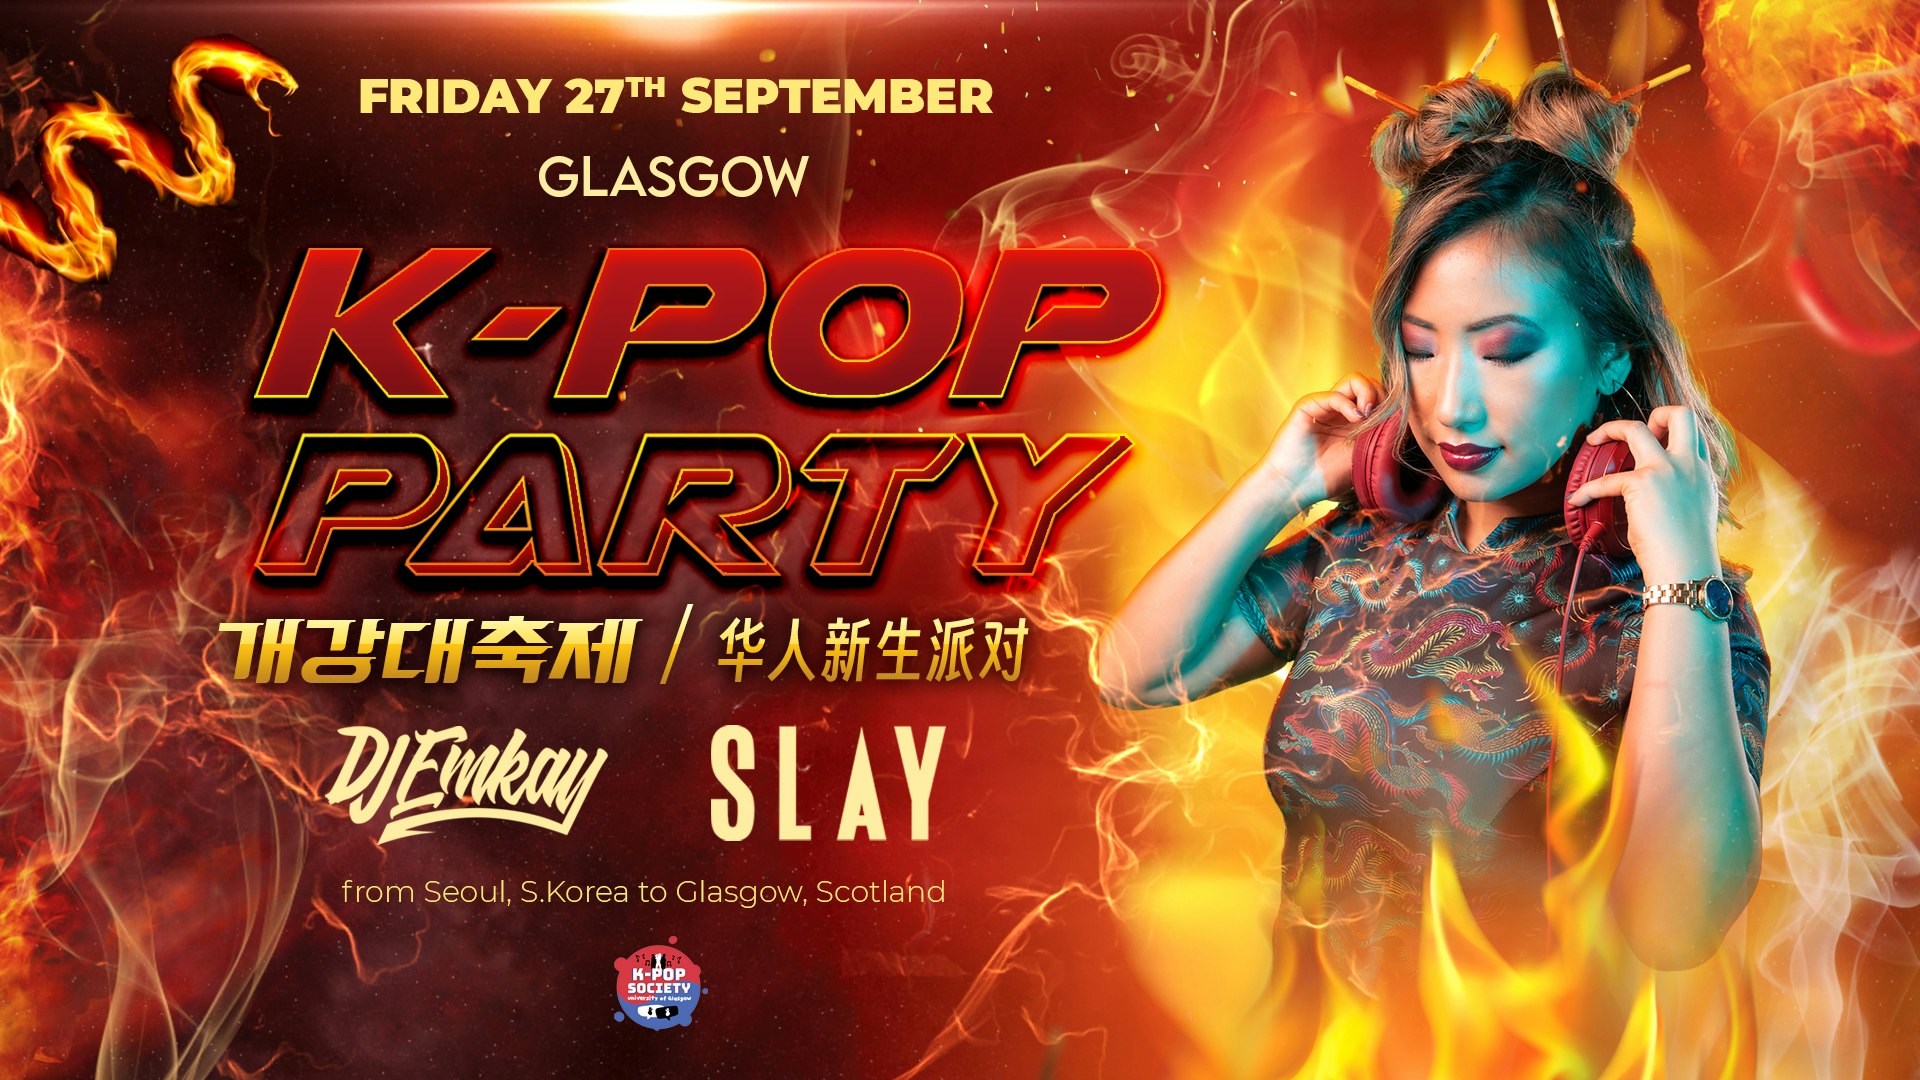 Glasgow K-Pop Party – Fire Tour with DJ EMKAY | Friday 27th September